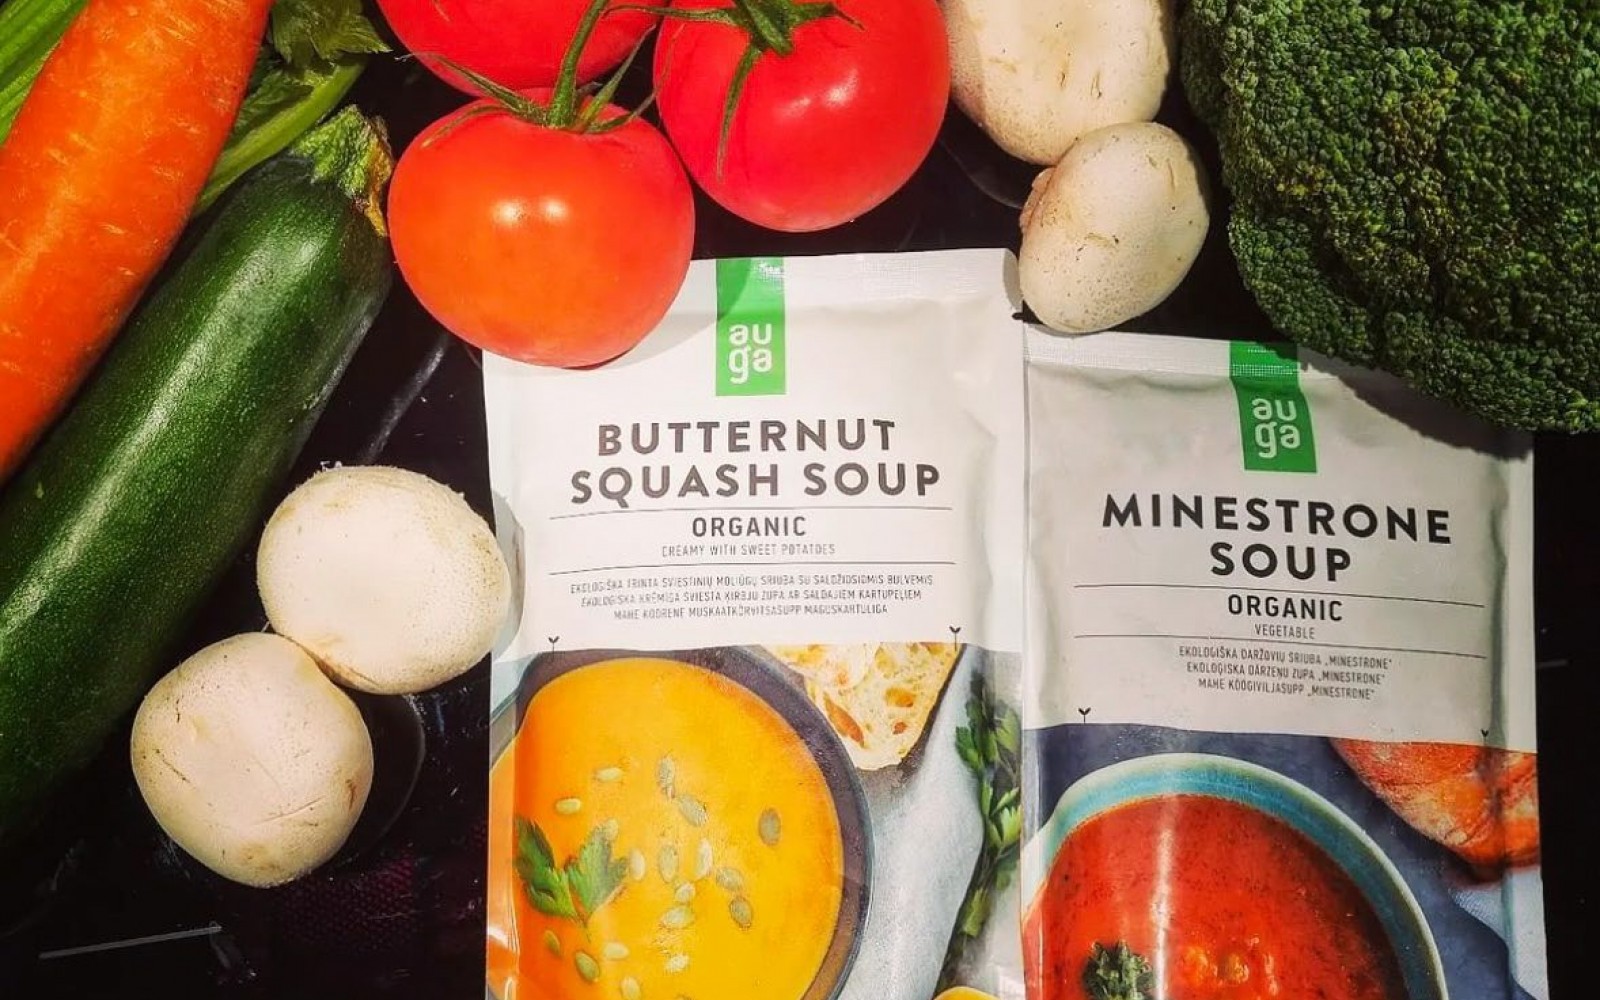 If you like healthy food, then our soup is the perfect choice for you!